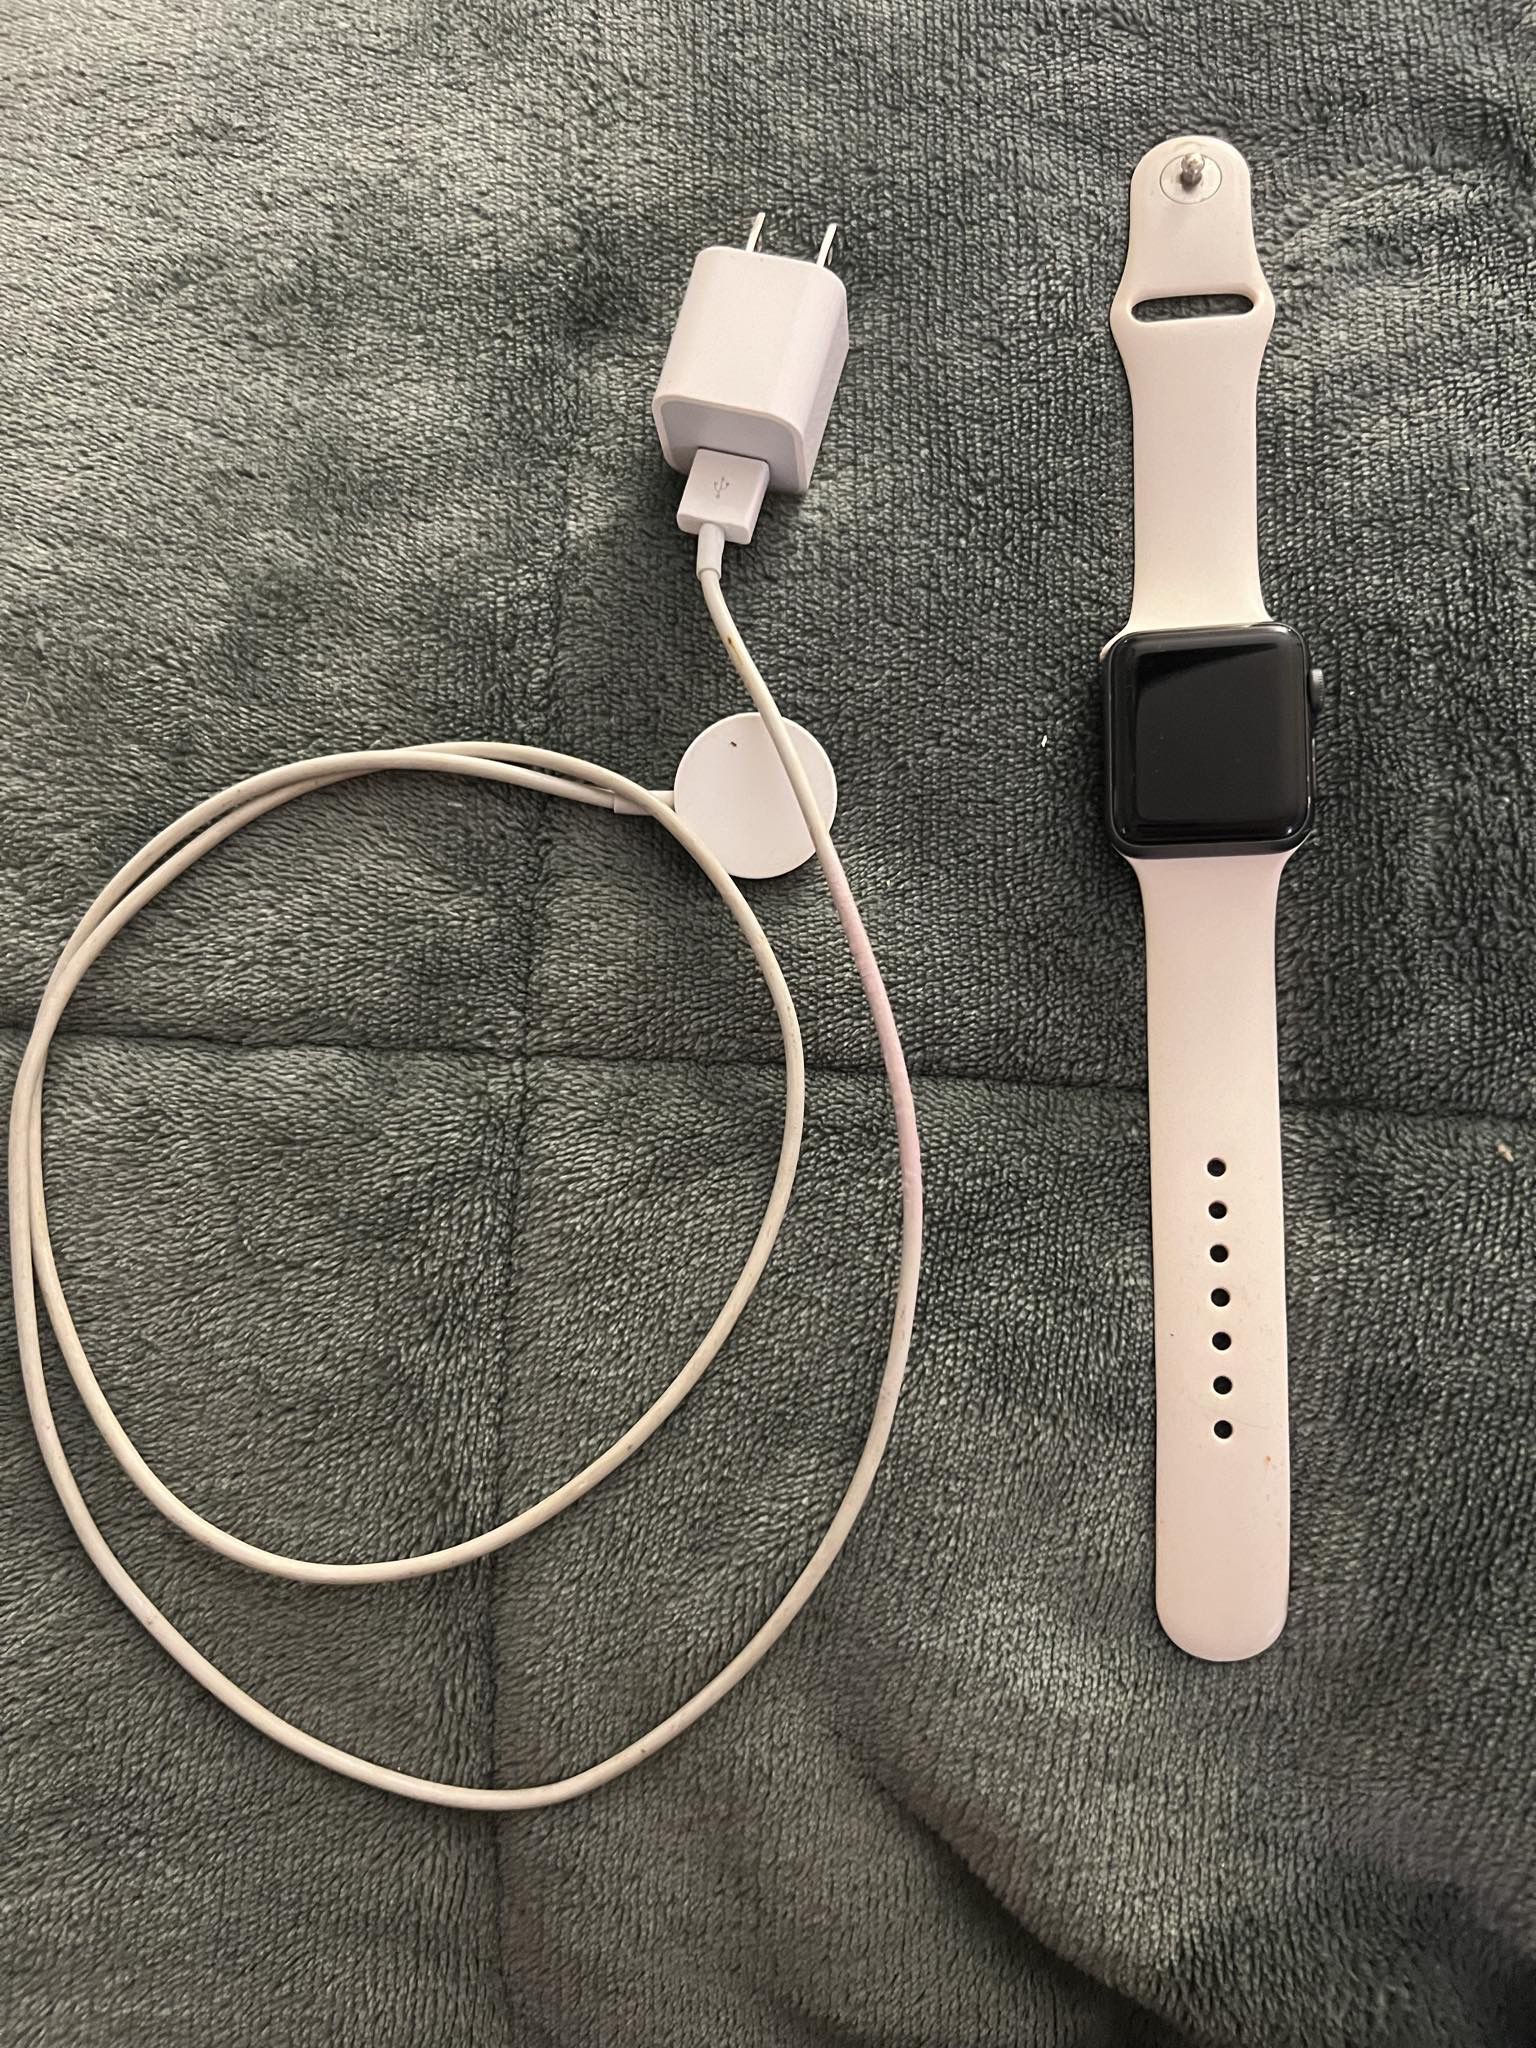 Series 3 Apple Watch And Charger 